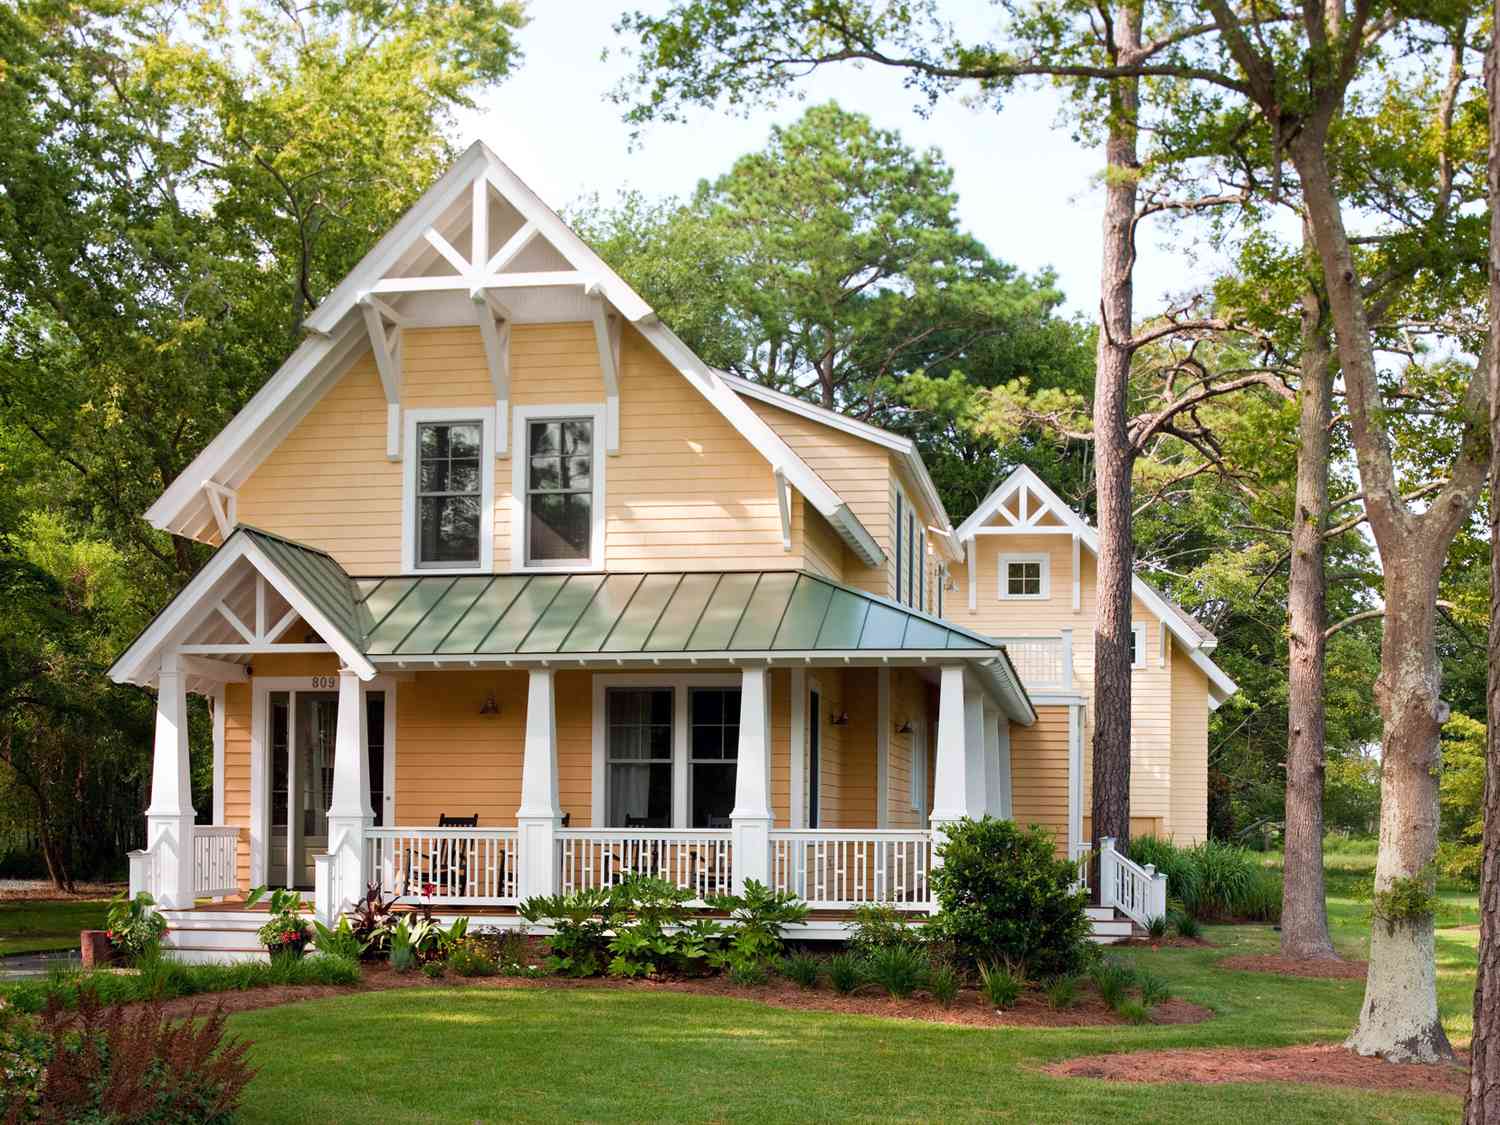 20 Craftsman Style Homes With Timeless Charm Better Homes Gardens